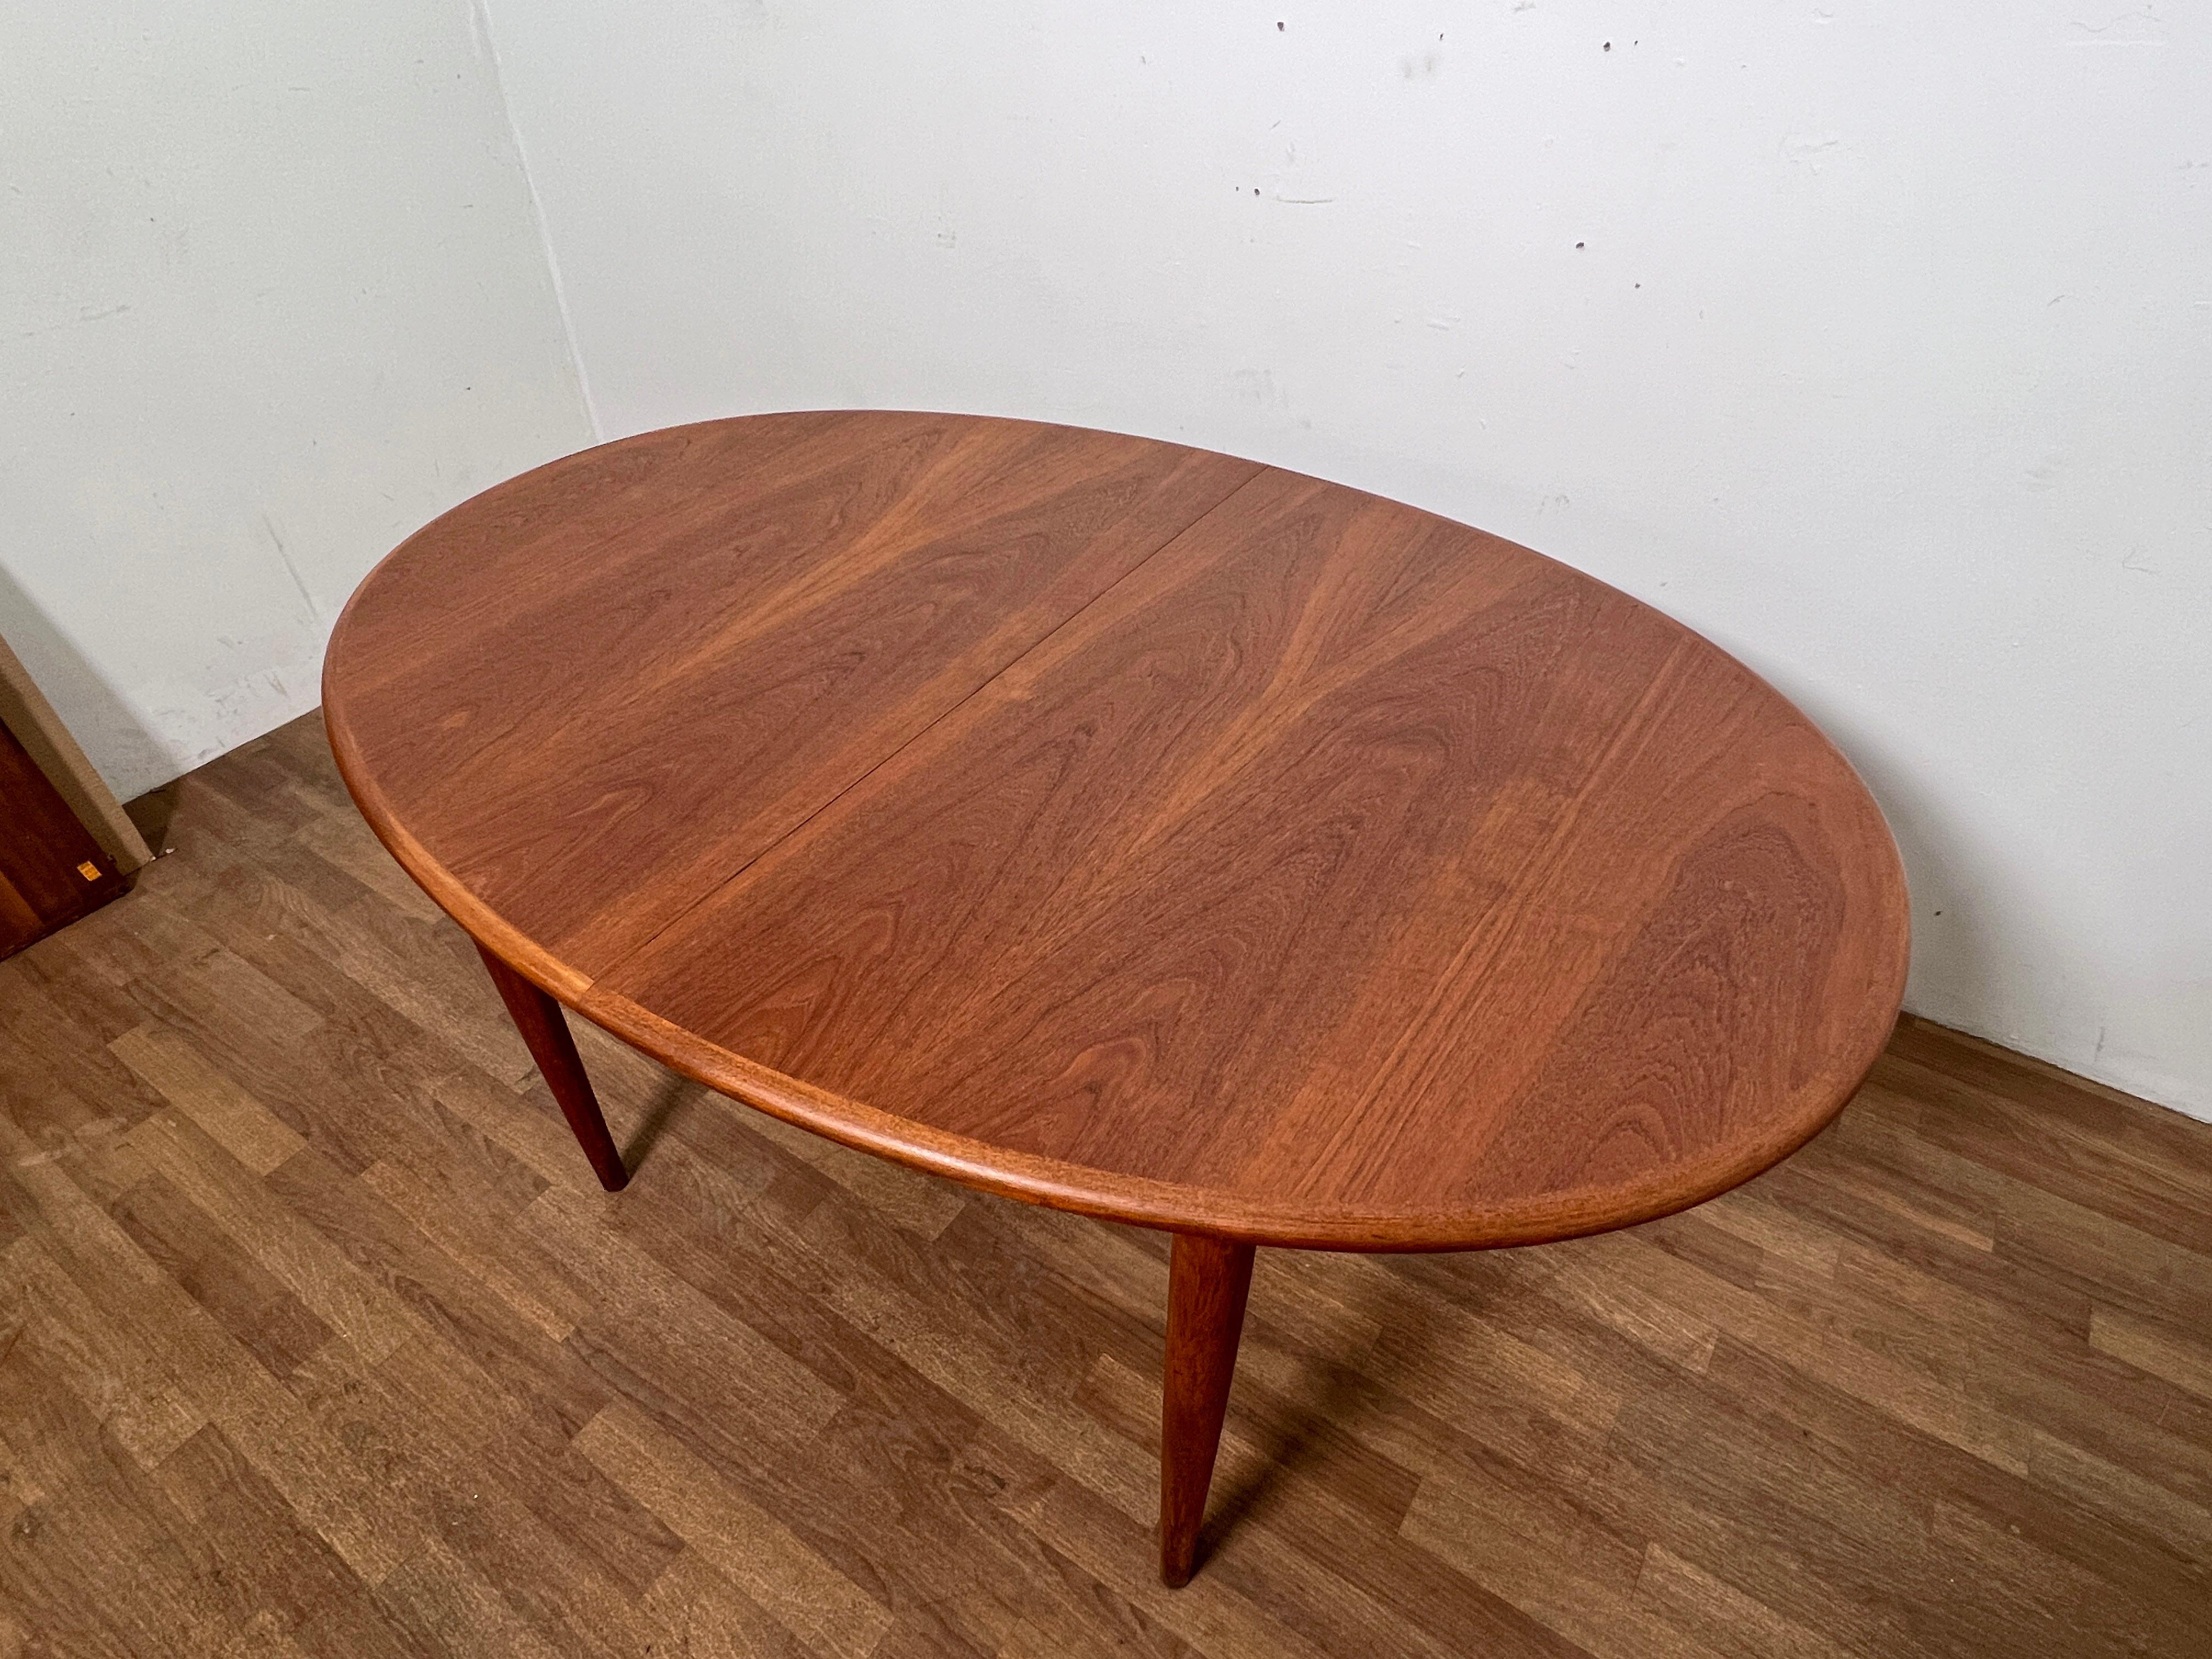 Danish teak oval dining table by Gudme, circa 1960s.   Includes two 19